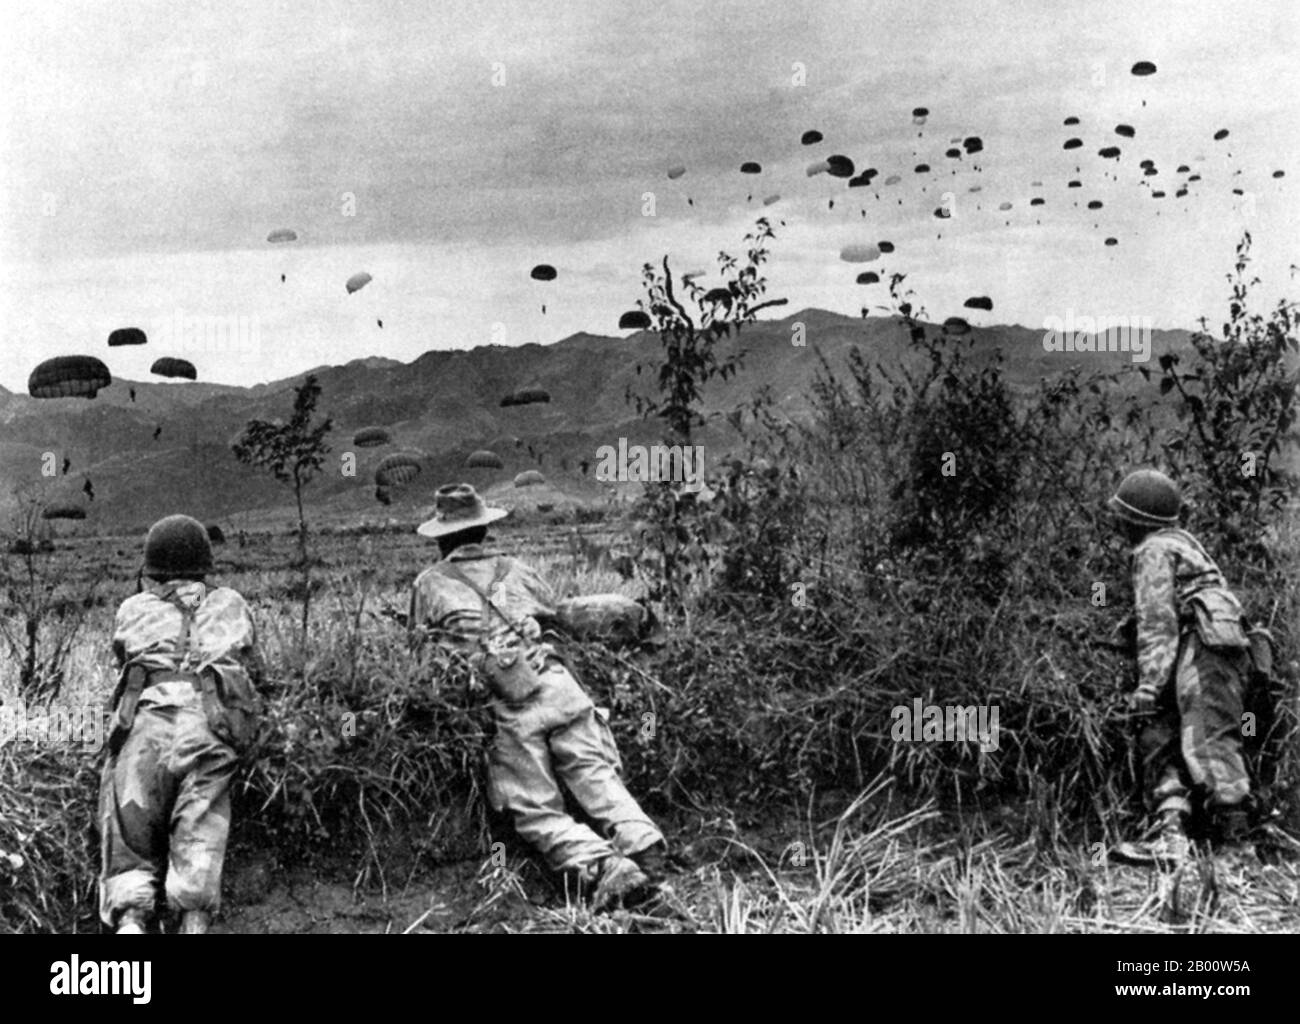 Vietnam: French paratroopers dropping on Dien Bien Phu, November 1953.  The Battle of Dien Bien Phu (French: Bataille de Dien Bien Phu; Vietnamese: Chien dich Dien Bien Phu) was the climactic confrontation of the First Indochina War between the French Union's French Far East Expeditionary Corps and Viet Minh communist revolutionaries. The battle occurred between March and May 1954 and culminated in a comprehensive French defeat that influenced negotiations over the future of Indochina at Geneva. Stock Photo